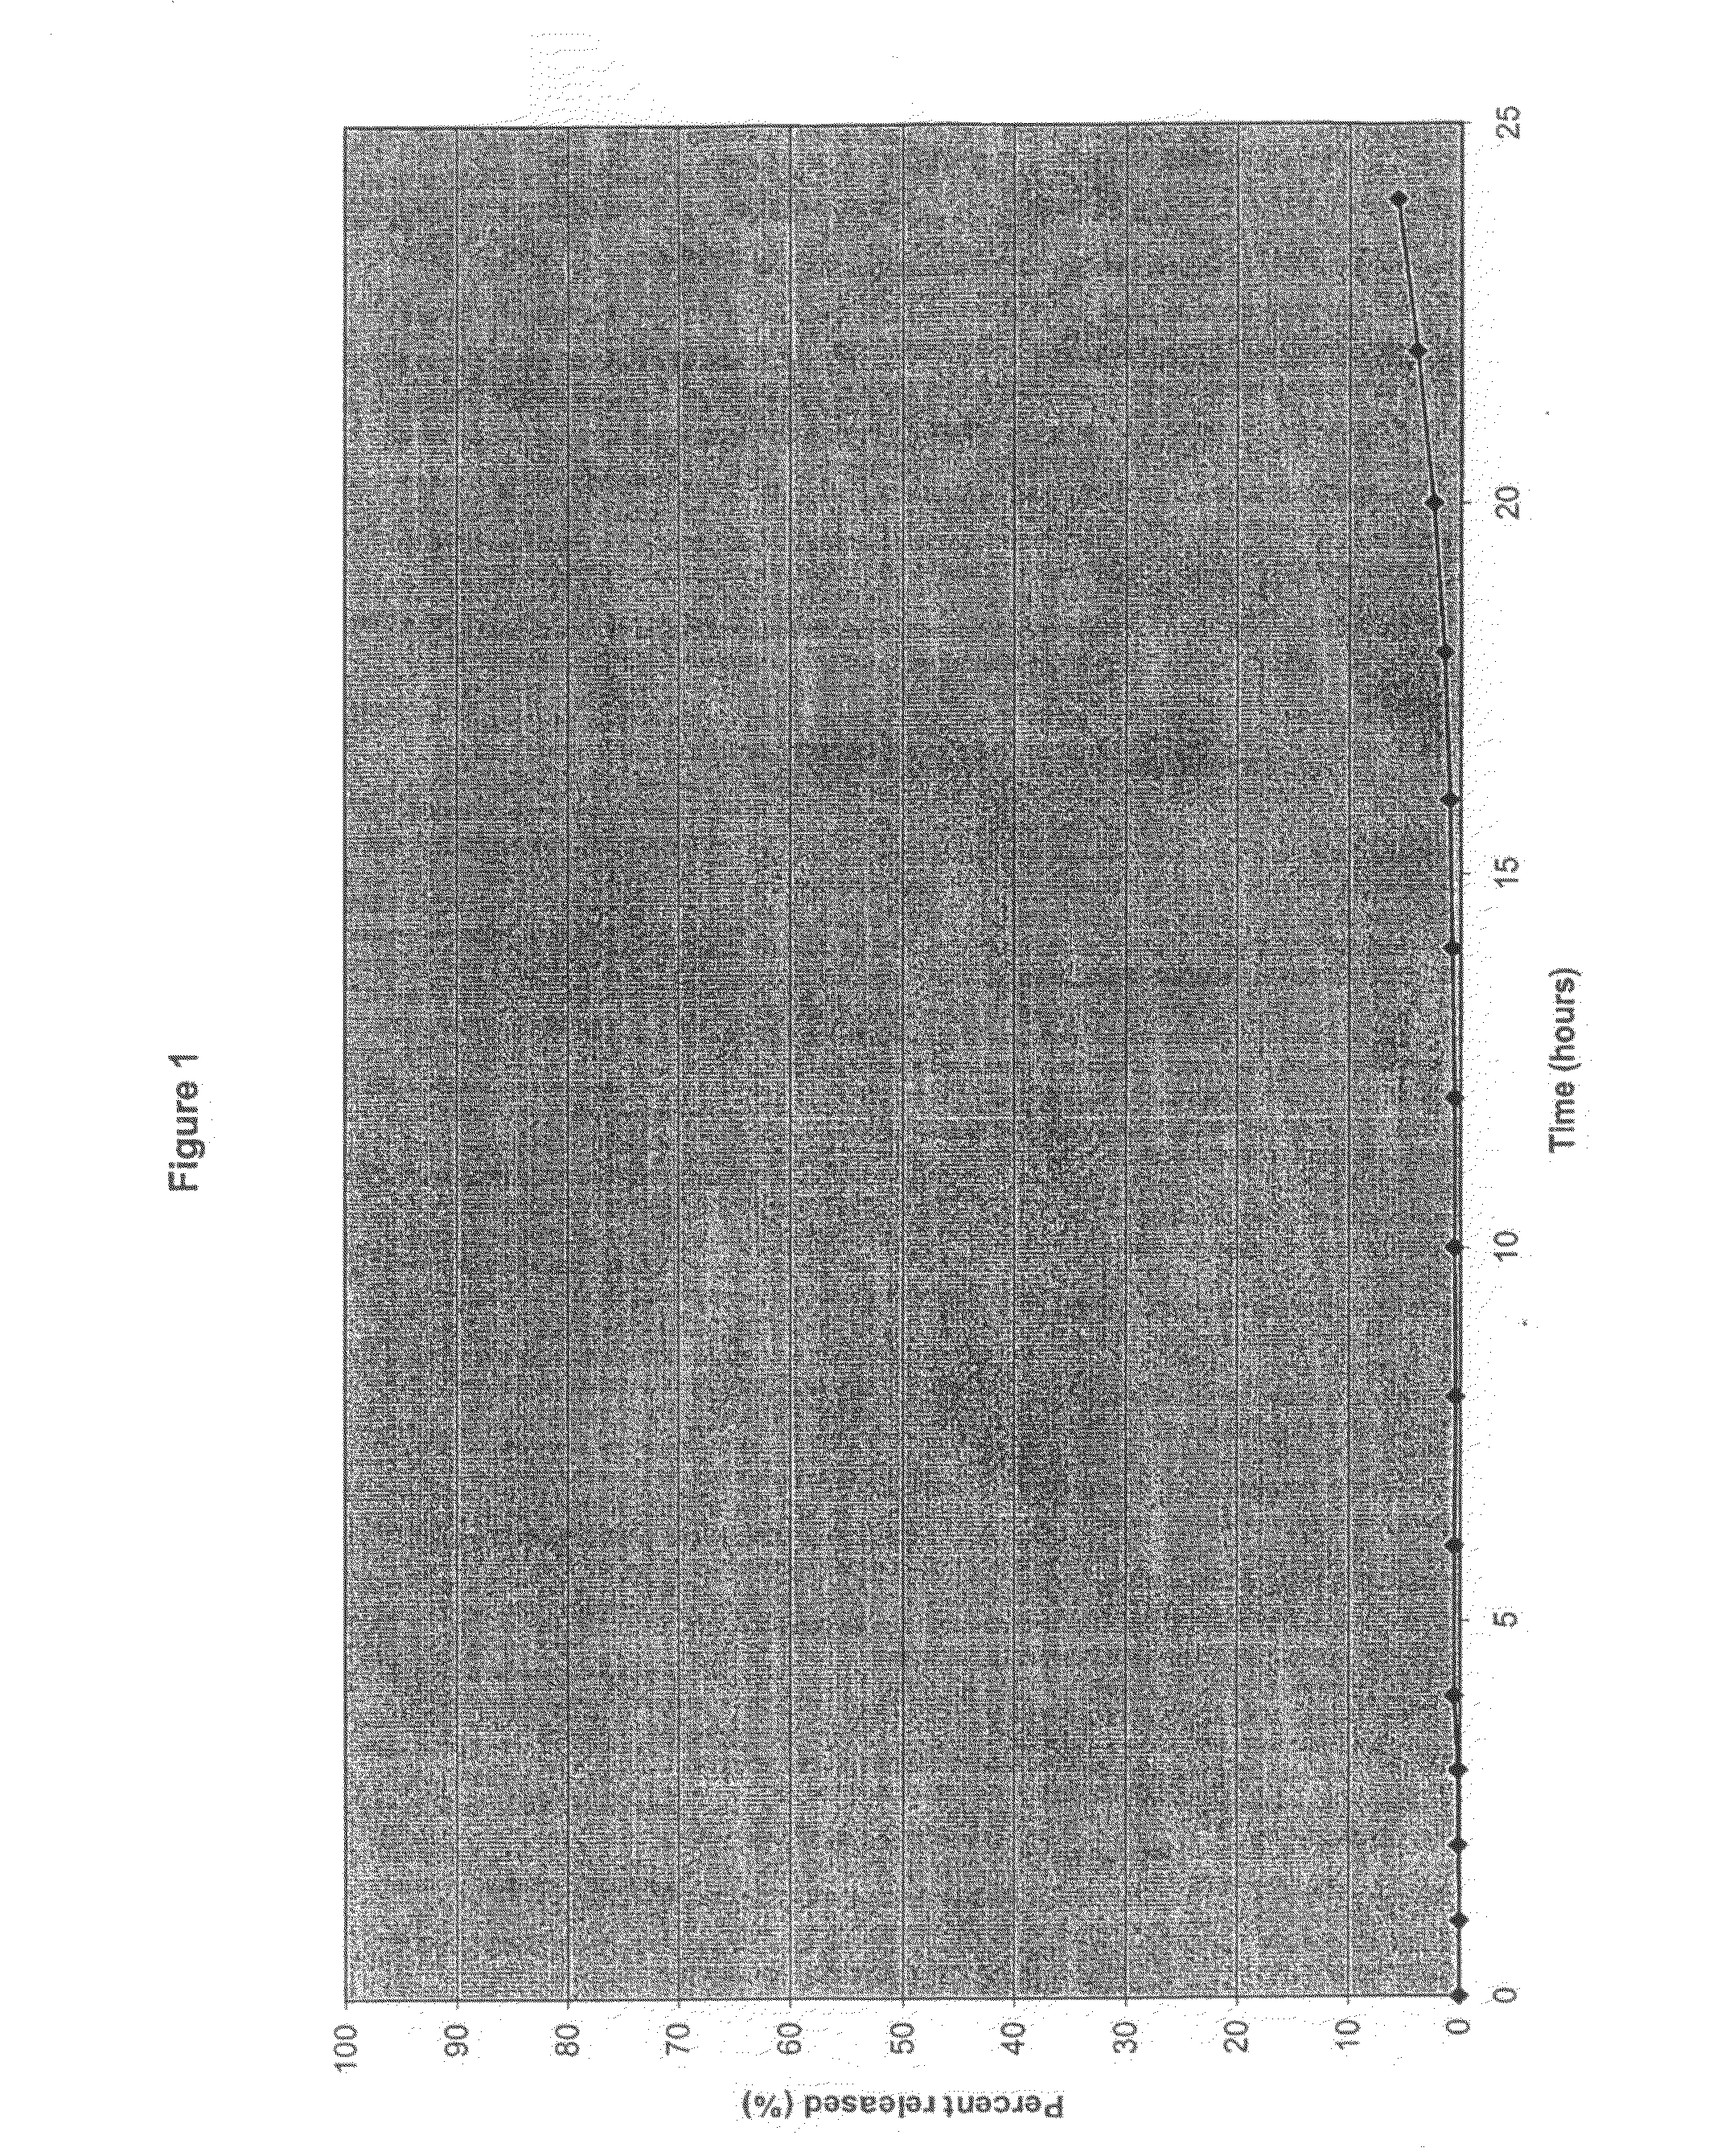 Abuse-resistant oral dosage forms and method of use thereof